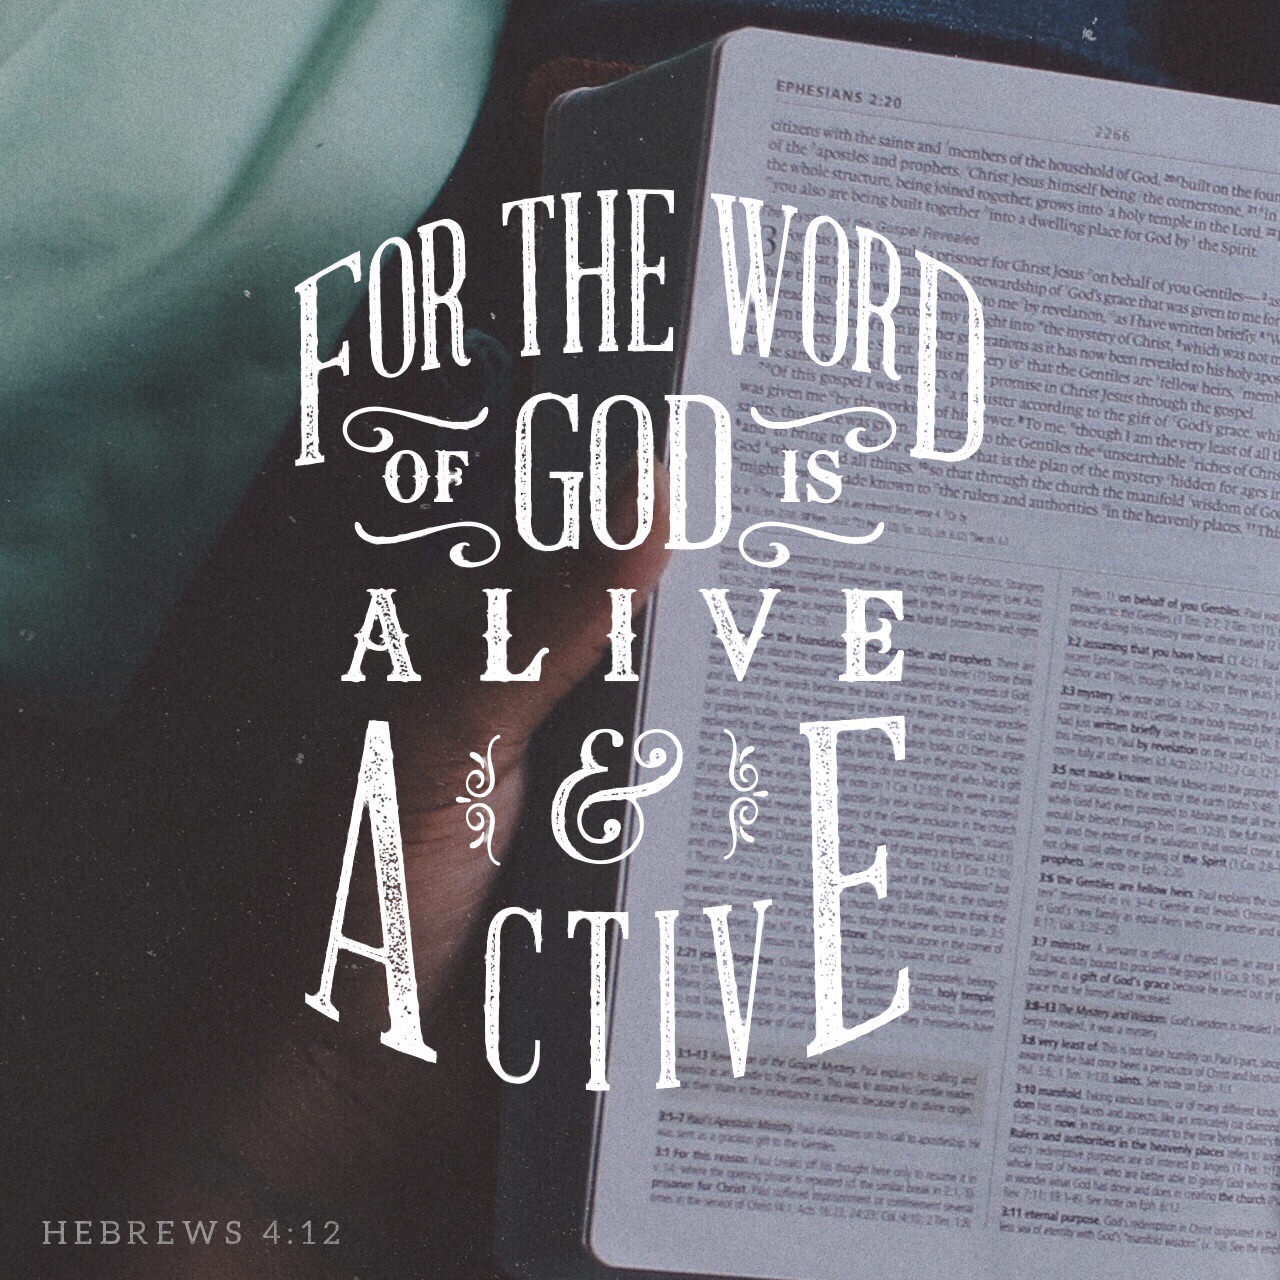 VOTD July 22, 2019 - For the word of God is living and active and sharper than any two-edged sword, and piercing as far as the division of soul and spirit, of both joints and marrow, and able to judge the thoughts and intentions of the heart. HEBREWS‬ ‭4:12‬ ‭NASB‬‬ 